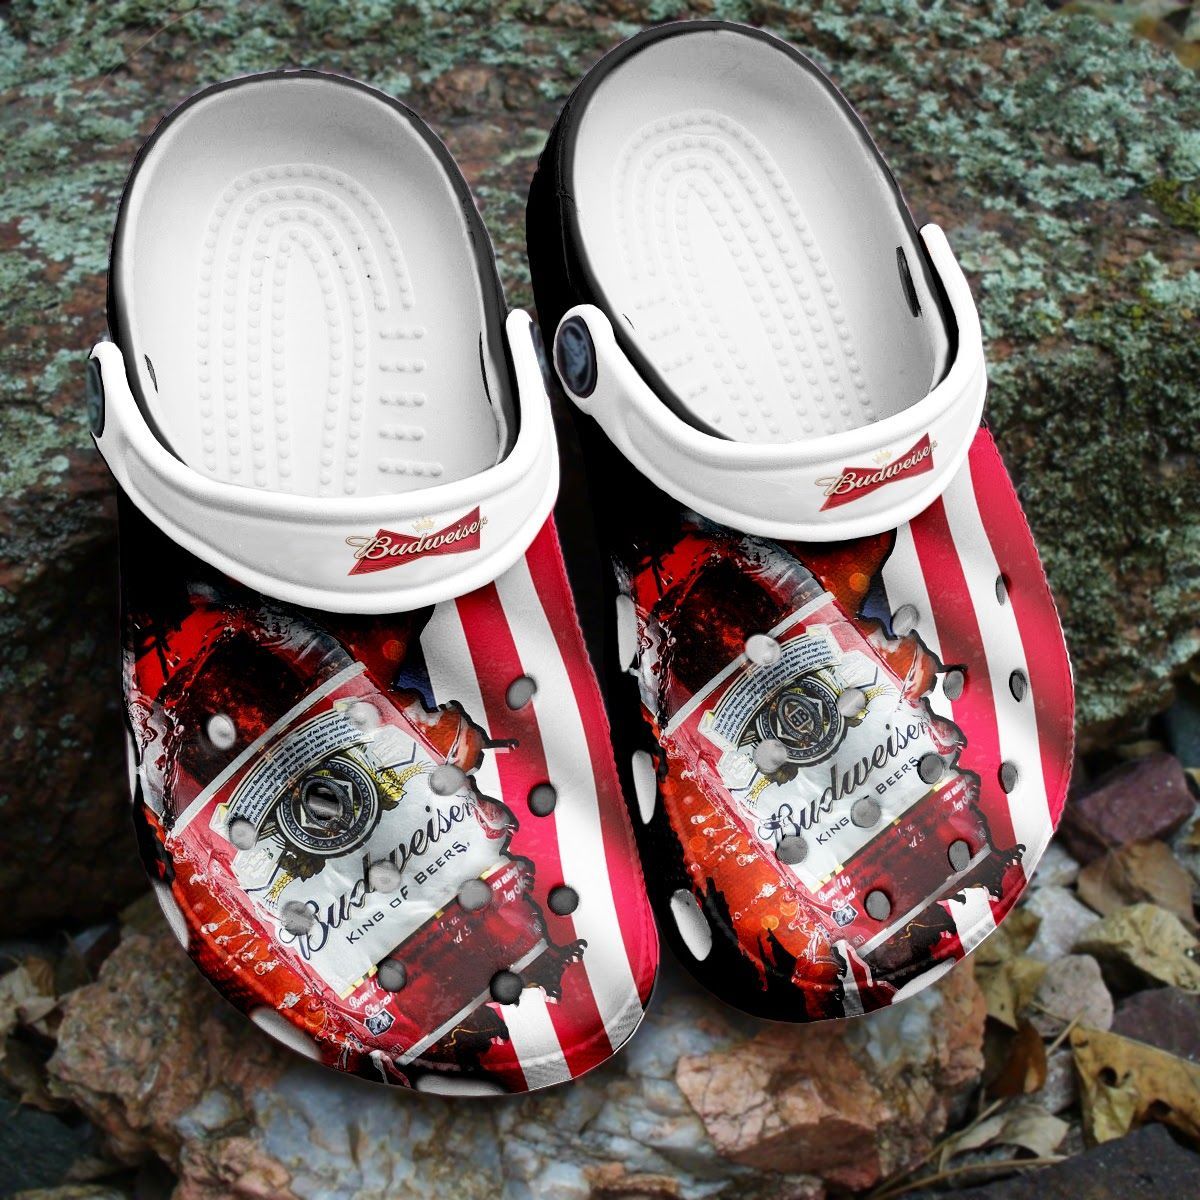 If you'd like to purchase a pair of Crocband Clogs, be sure to check out the official website. 129